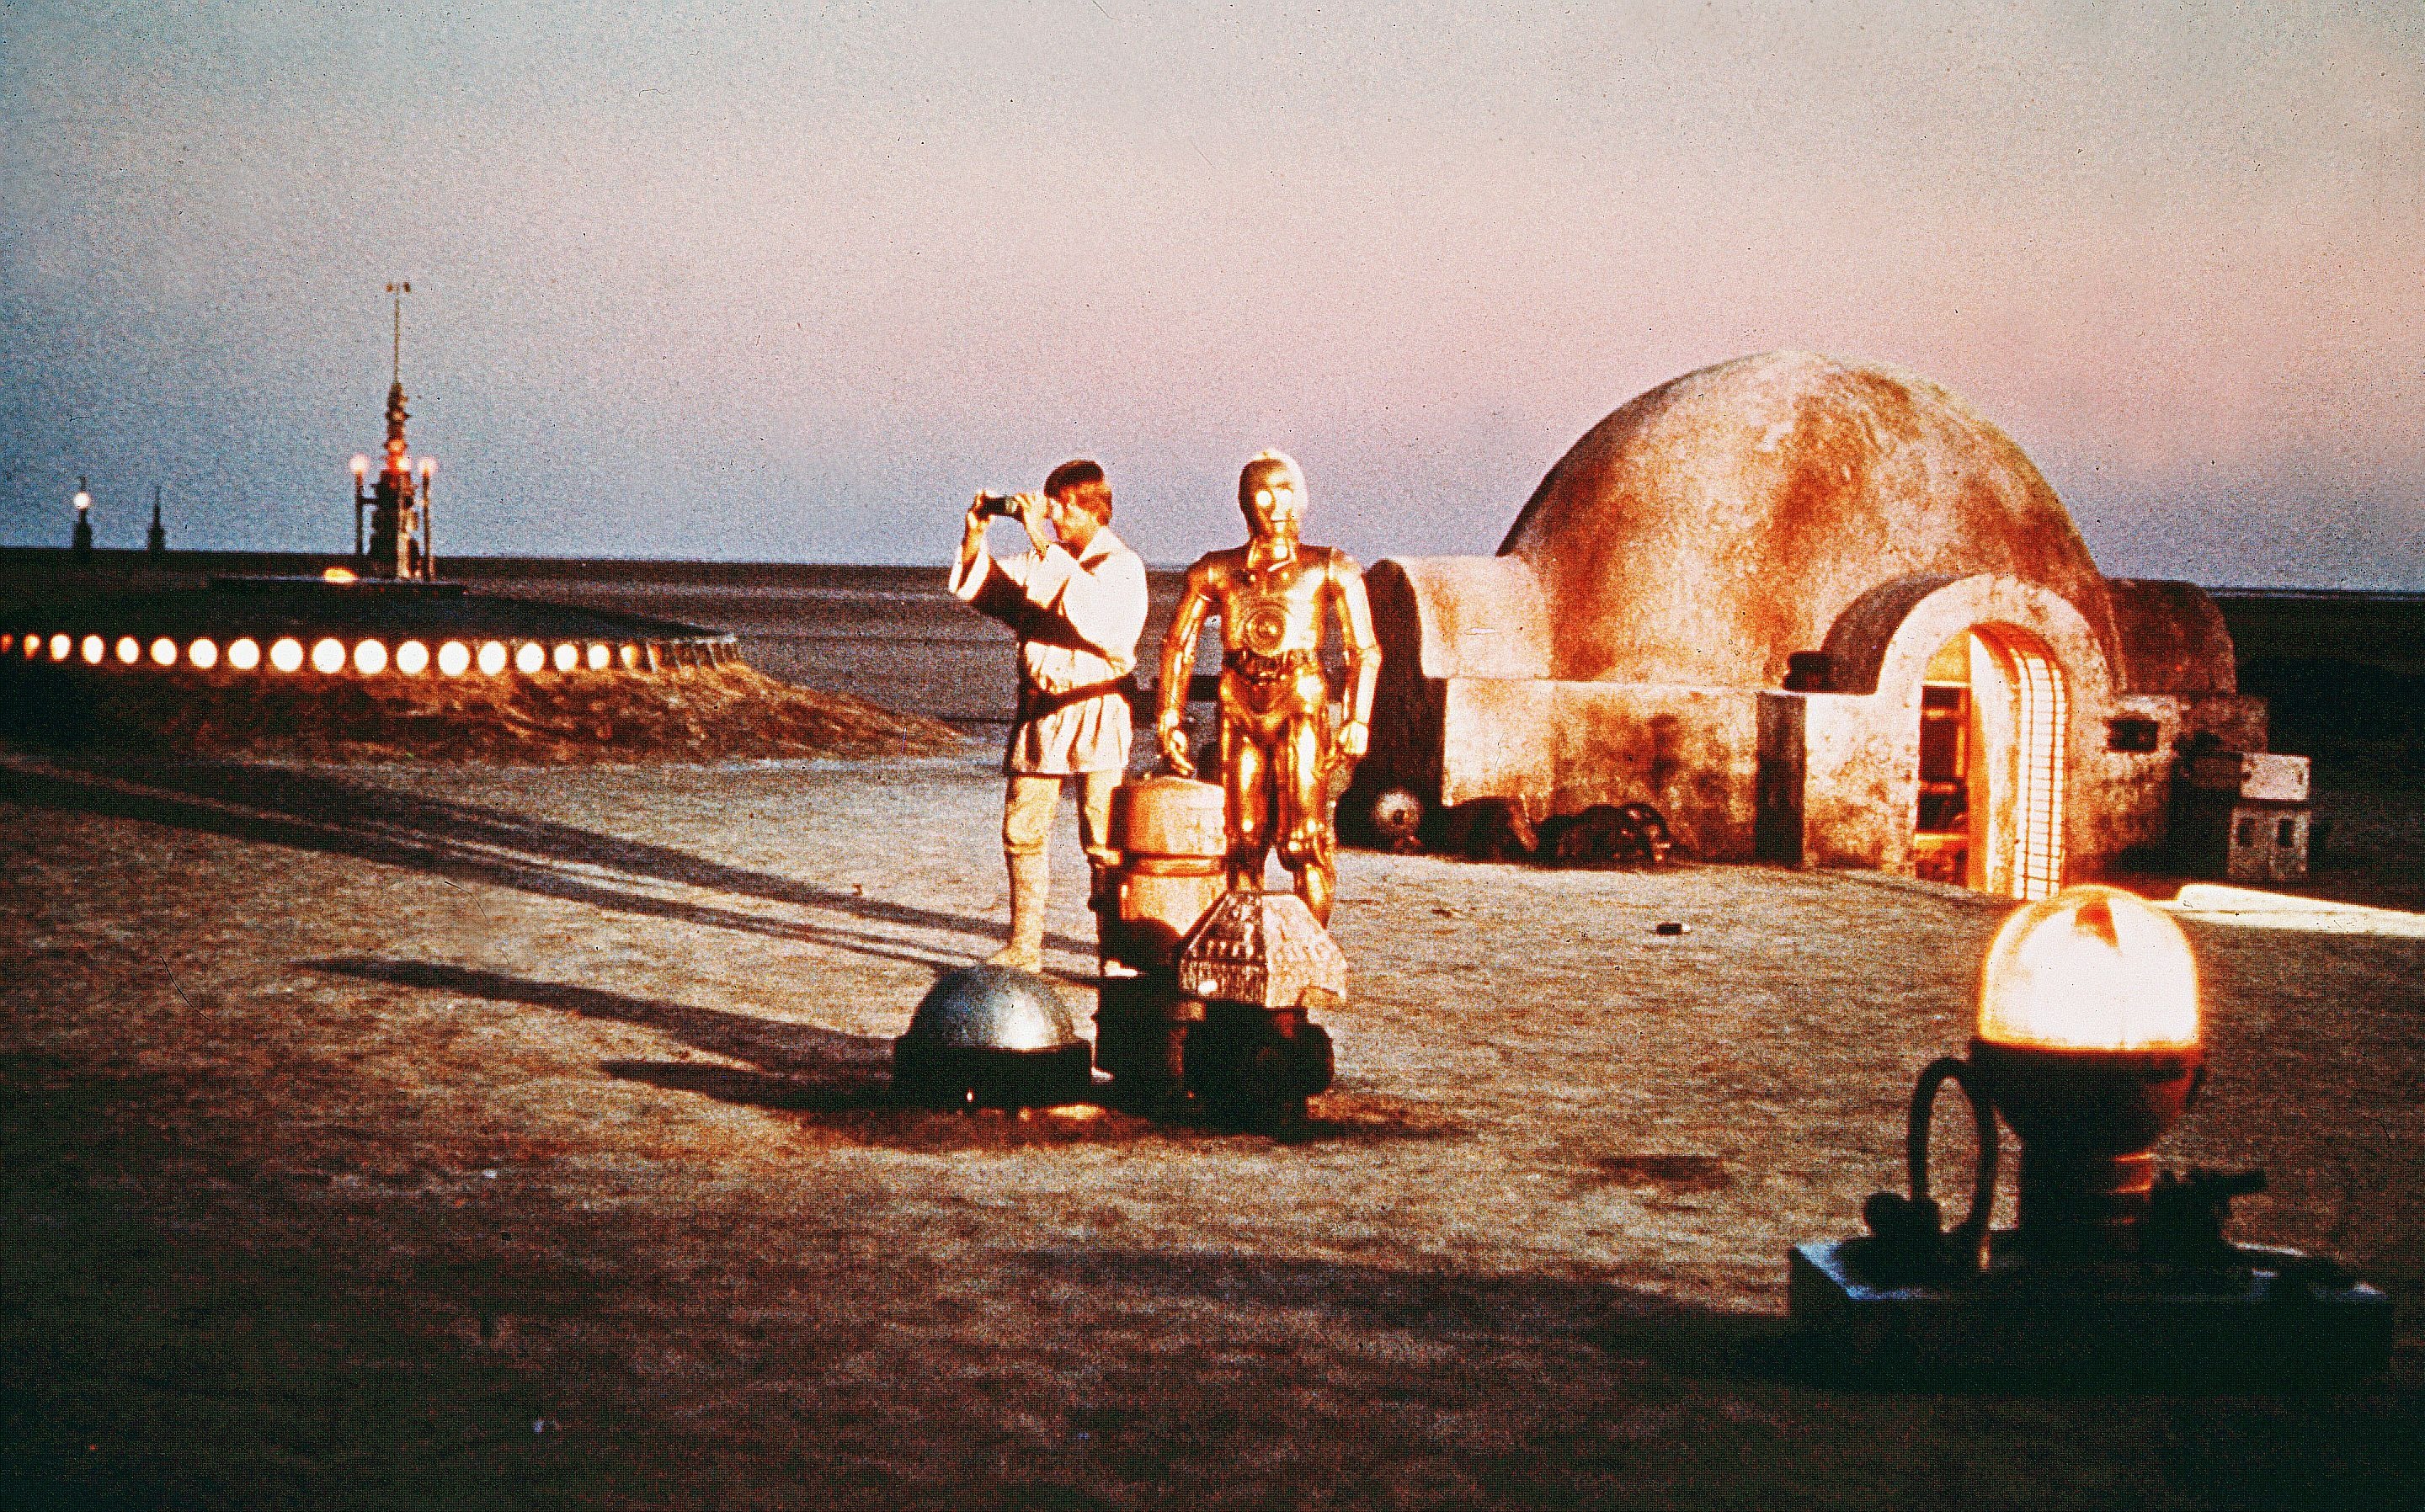 The planet Tatooine was actually in Tunisia